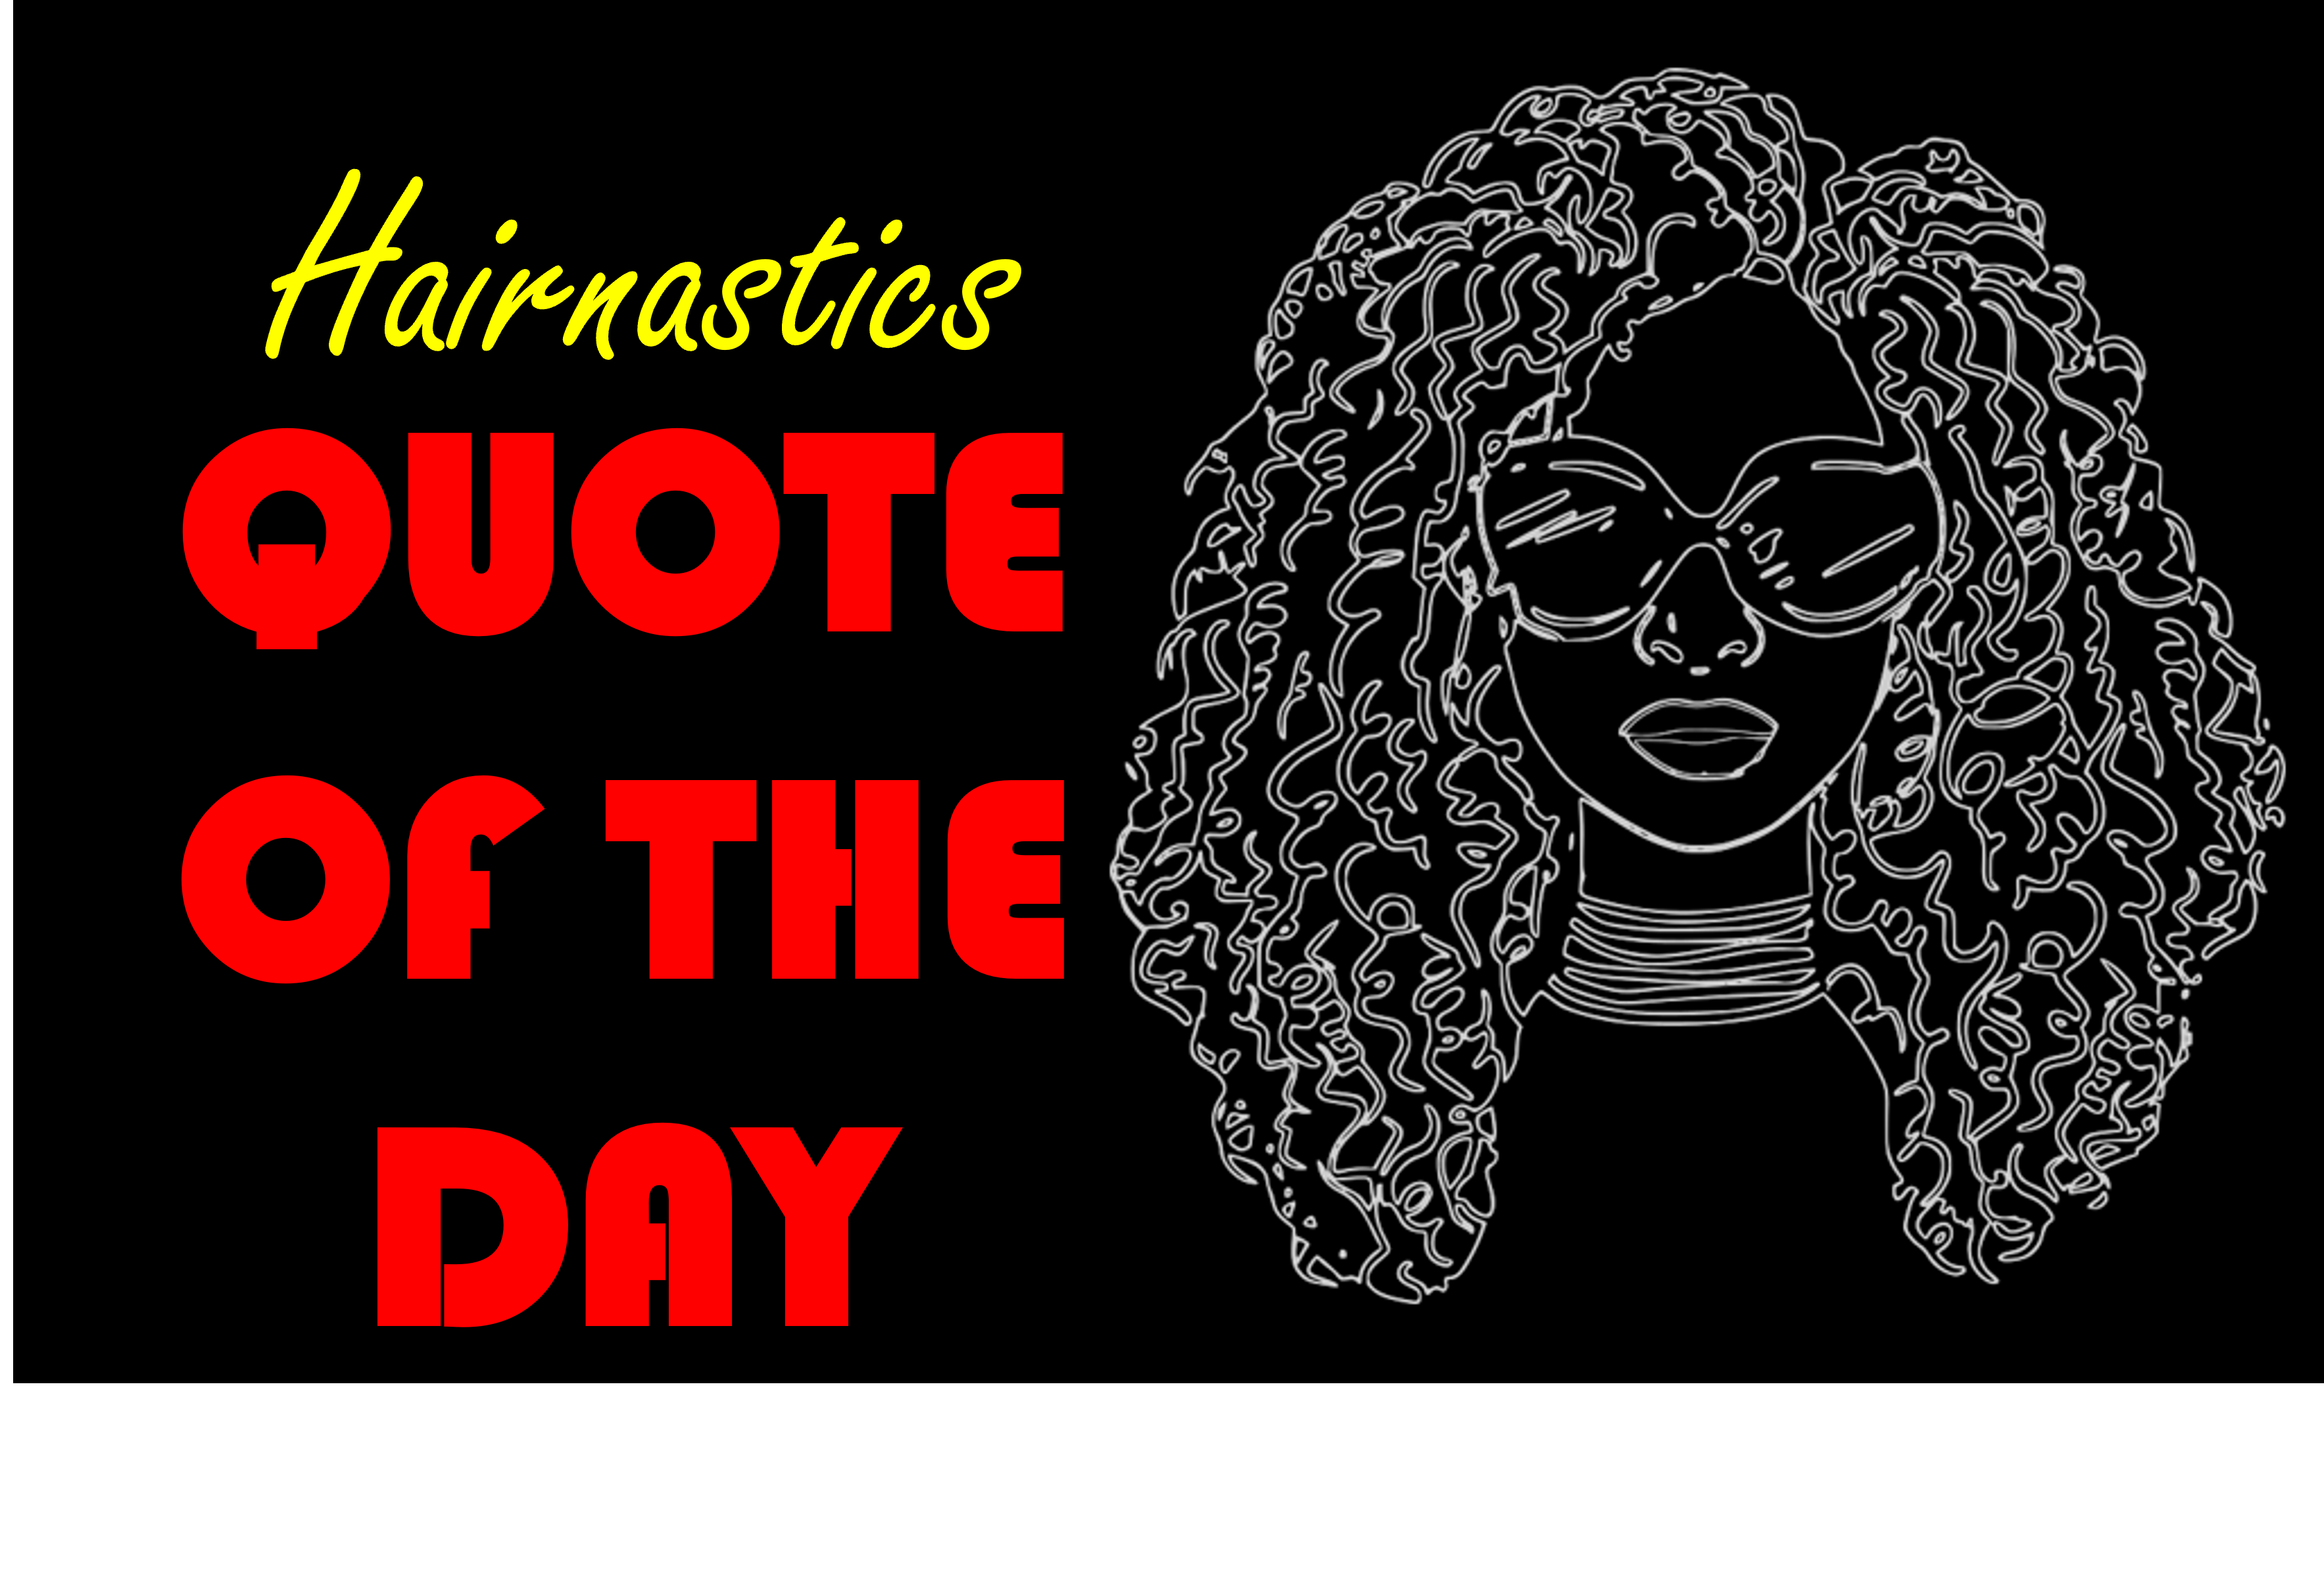 Hairnastics Quote of the Day